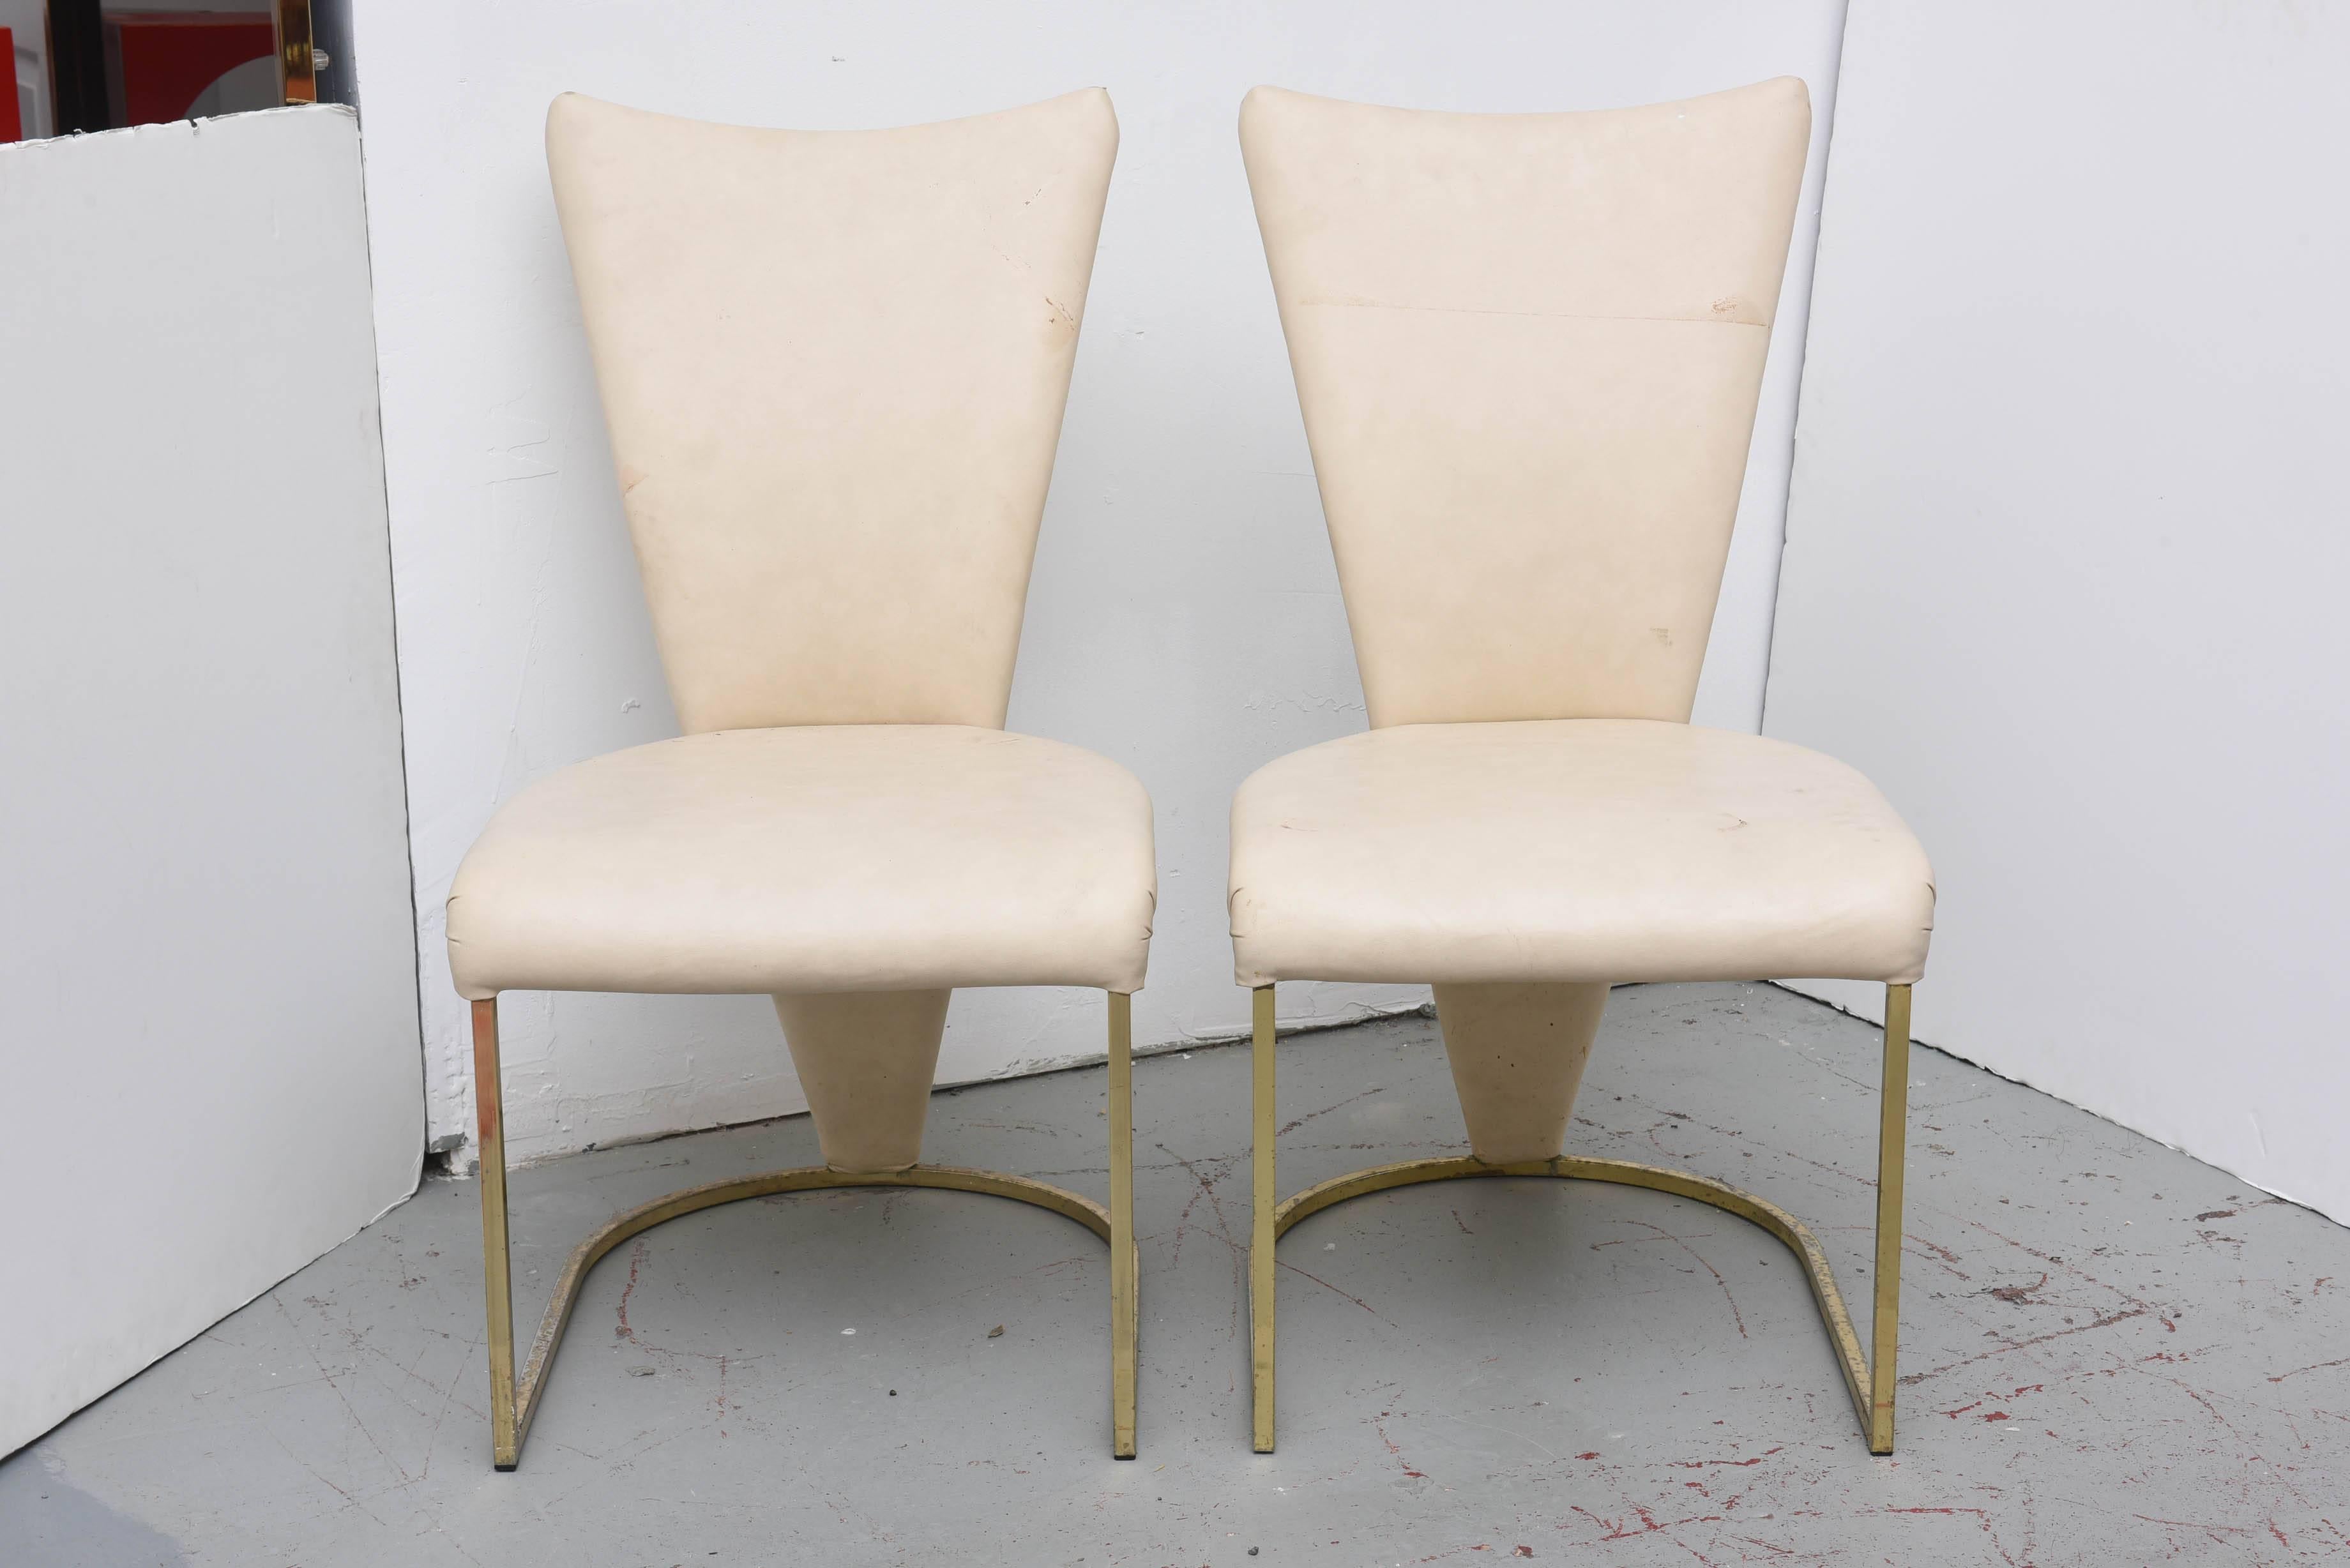 Wonderful form on these DIA Brass chairs.  Chairs need polishing or replating and reupholstery, but they are structurally very sound.  USA 1980s  Our guys can do the plating for a fee to make them as new.